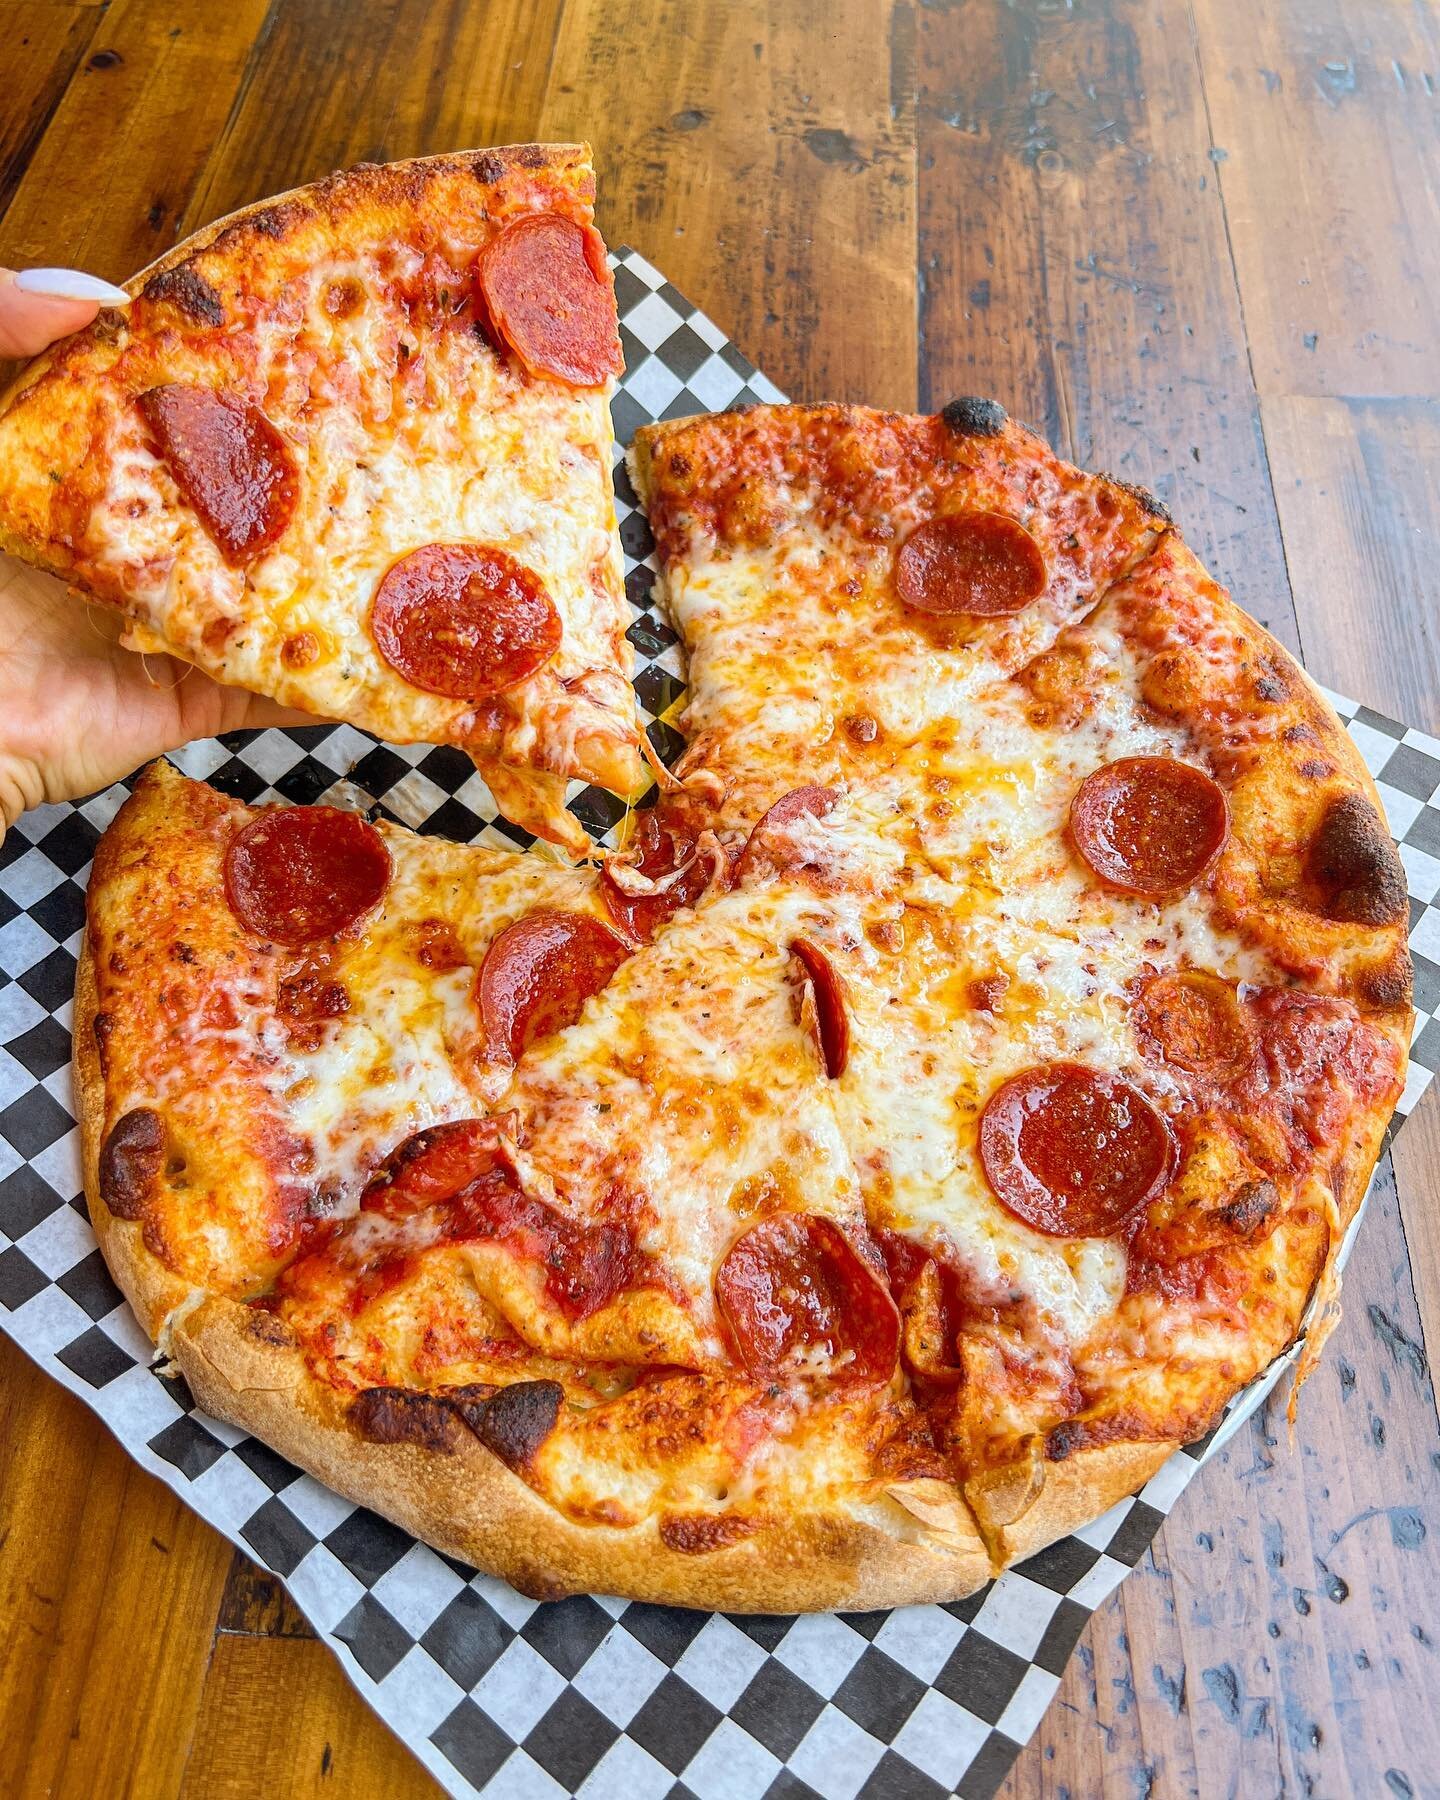 Can&rsquo;t ever go wrong with a fresh Pepperoni pizza straight out the oven‼️ 🔥🔥🔥

Order at any of our 3 locations:
📍Glenoaks Blvd, Burbank
📍Foothill Blvd, La Crescenta 
📍Woodman Ave, Sherman Oaks

Hours Mon-Sun 10am-10pm

#AmeciPK 🍕